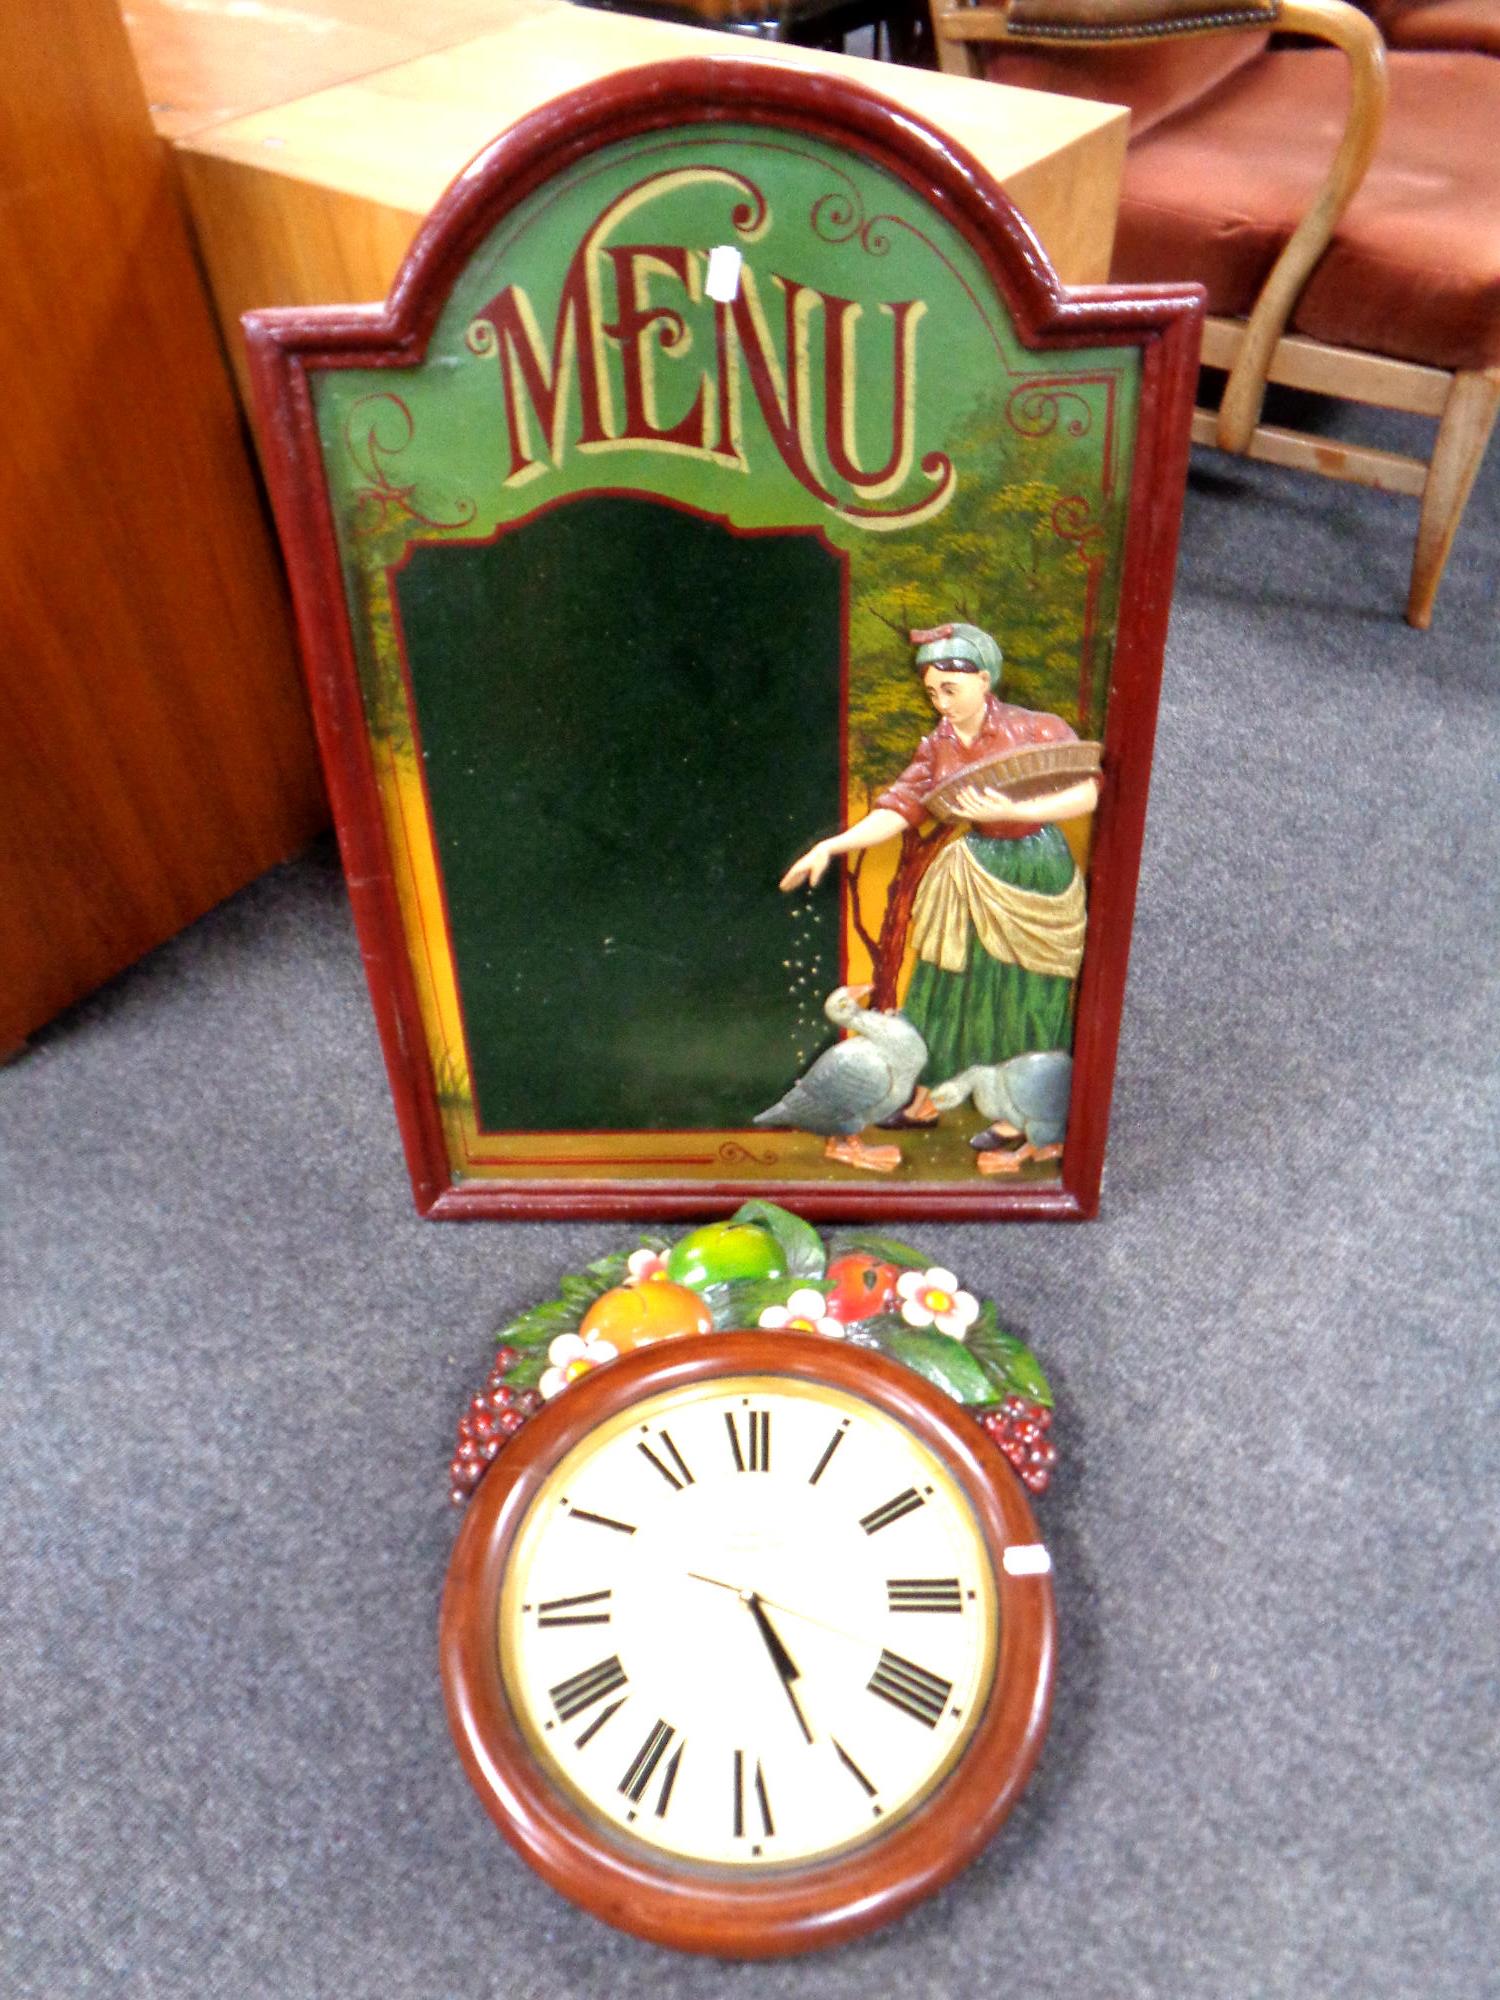 A wooden menu board together with a wooden wall clock